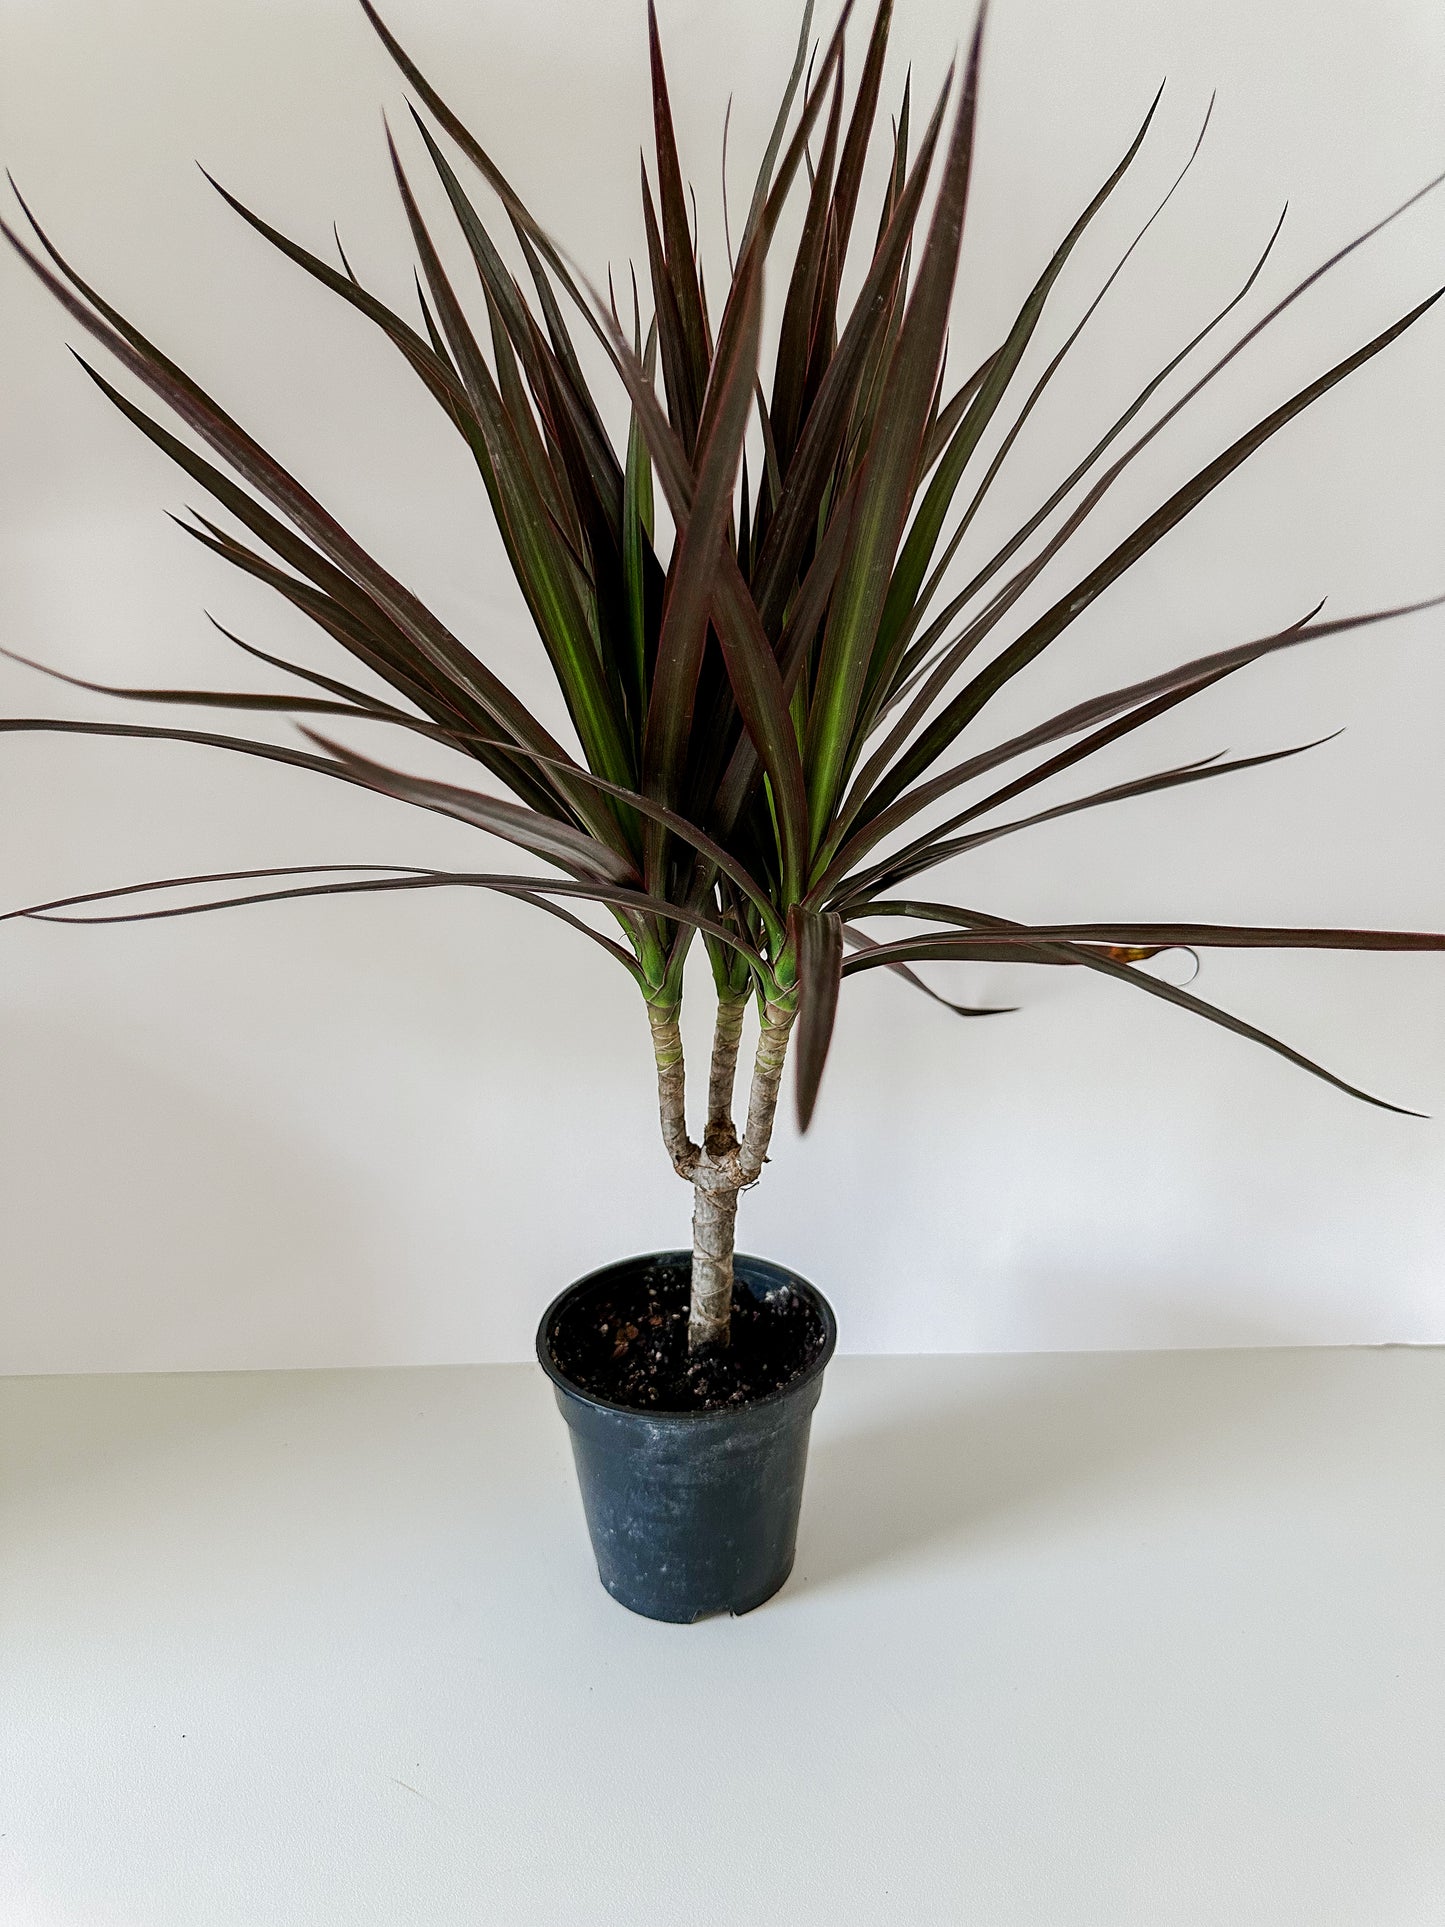 Dracaena 'Marginata Magenta'- Cute, 🌱 Beginner Friendly, Low Maintenance Tropical Tree Plant For Office or Low Light Rooms- (4 Inch or 6 Inch Nursery Pot)